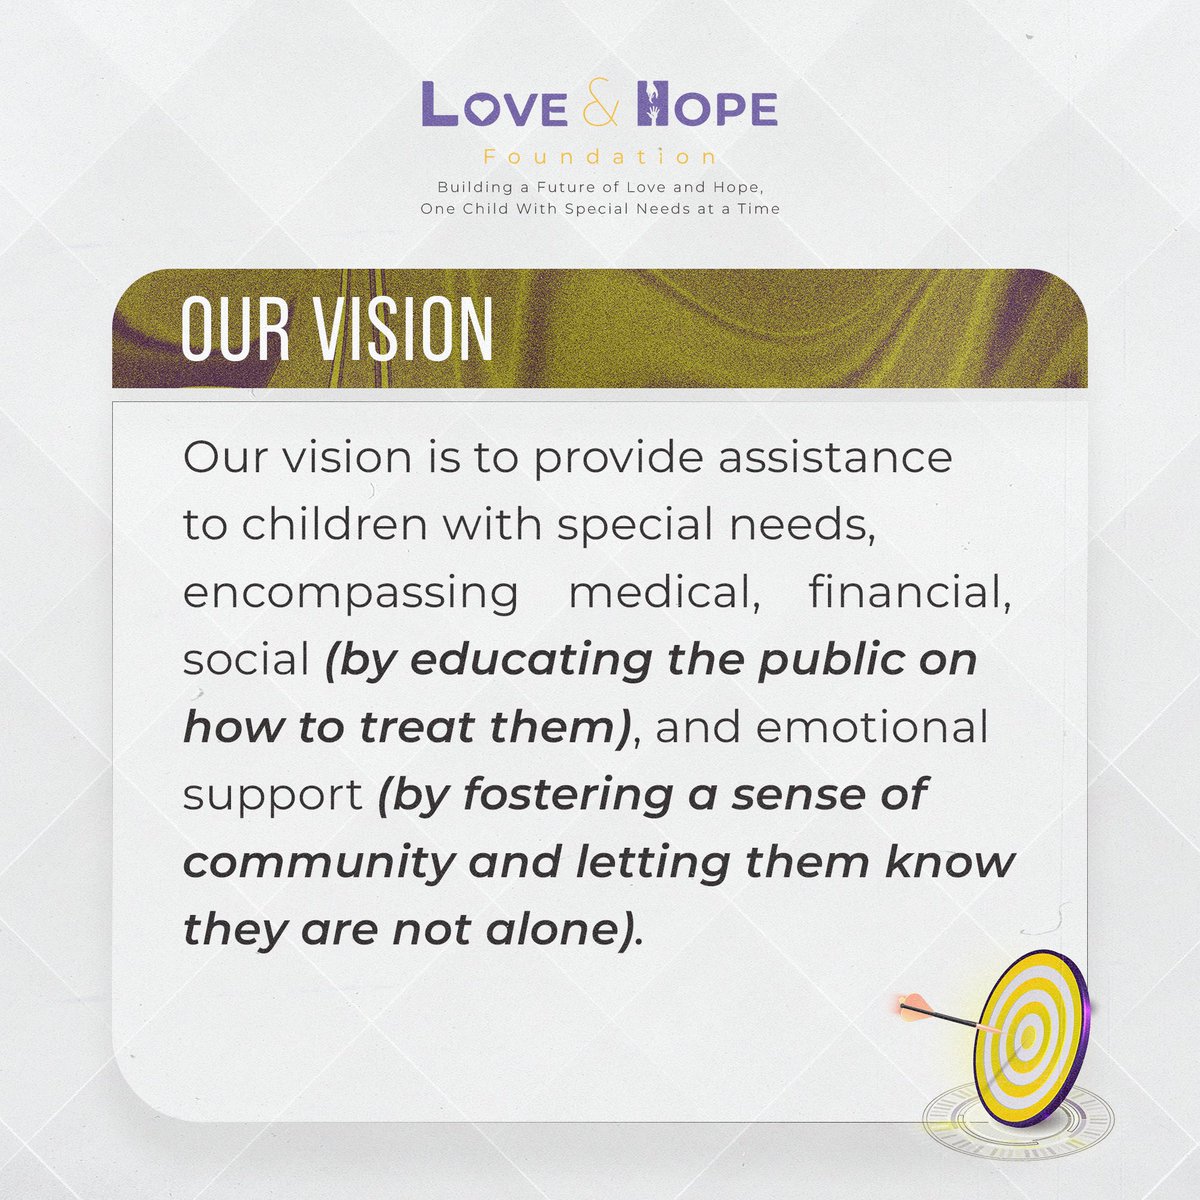 Our mission and vision at LOVE AND HOPE FOUNDATION💜💛🤍

#LoveandHope #SpecialNeeds #Empowerment #ChildrenFoundation #LoveandHopefoundation  #empowerment #awareness #education #specialneedsadvocacy